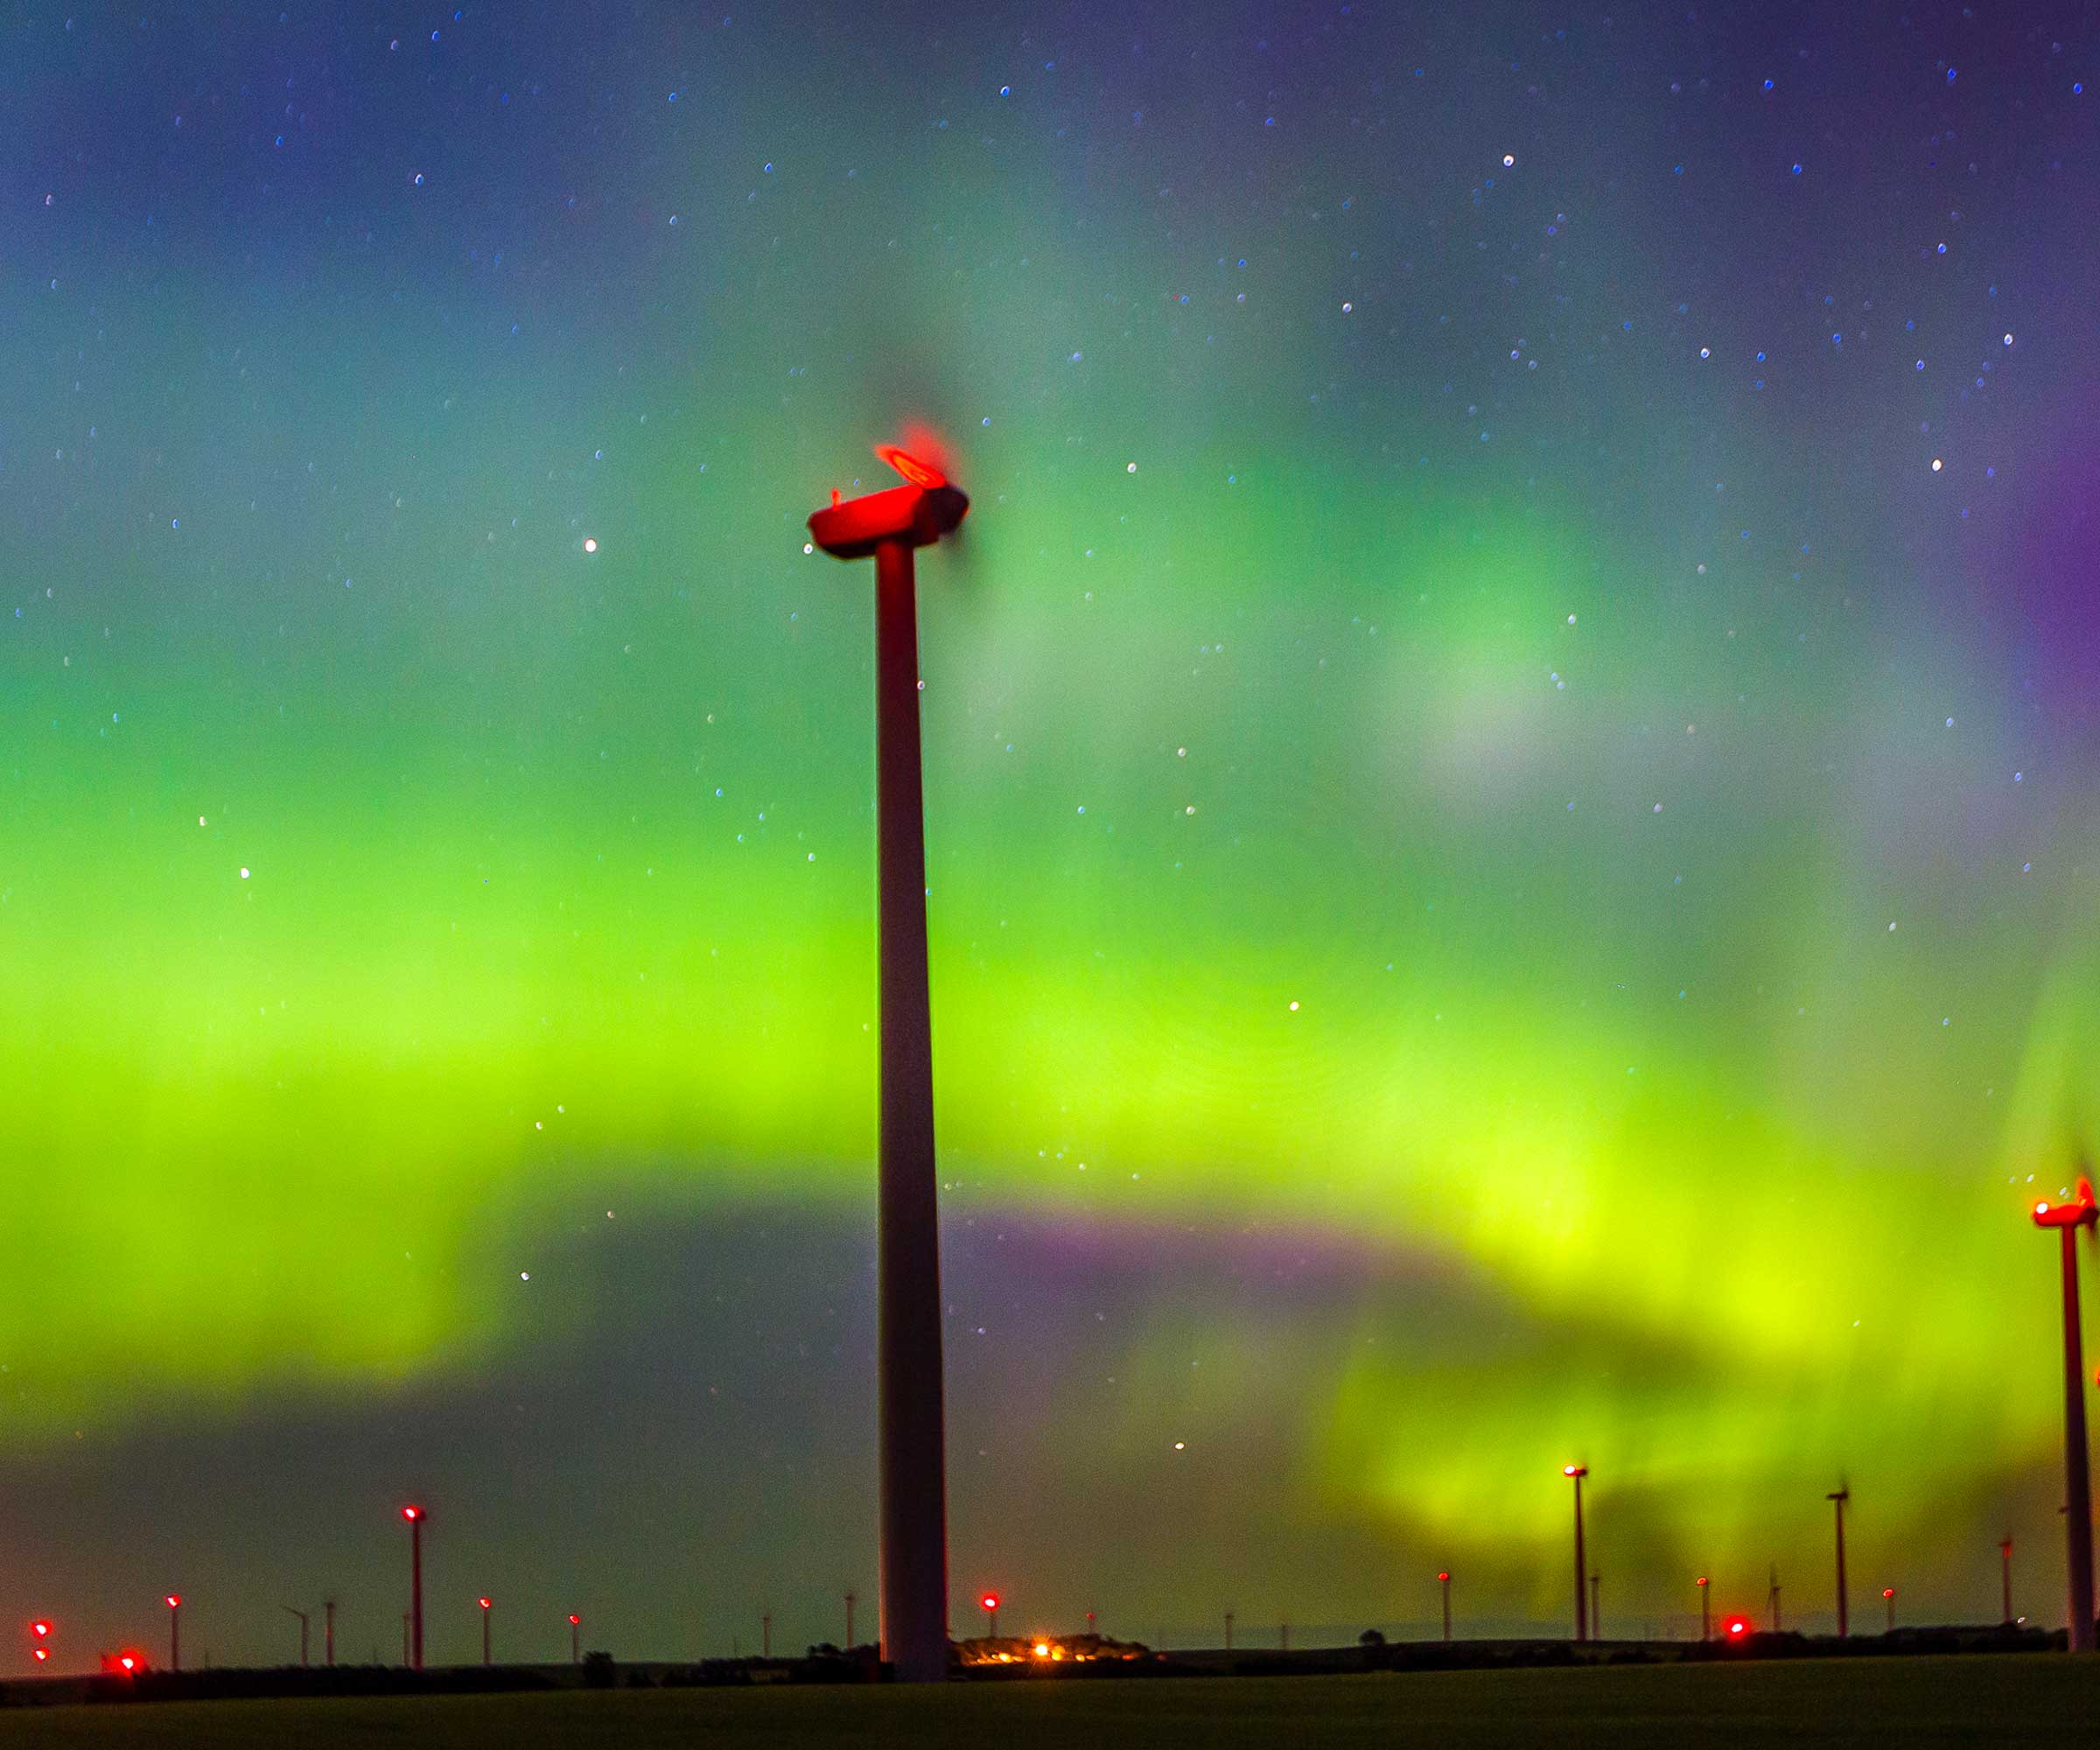 The Northern Lights appear in the sky over a wind farm near Bismarck, ND. © Mike Theiss